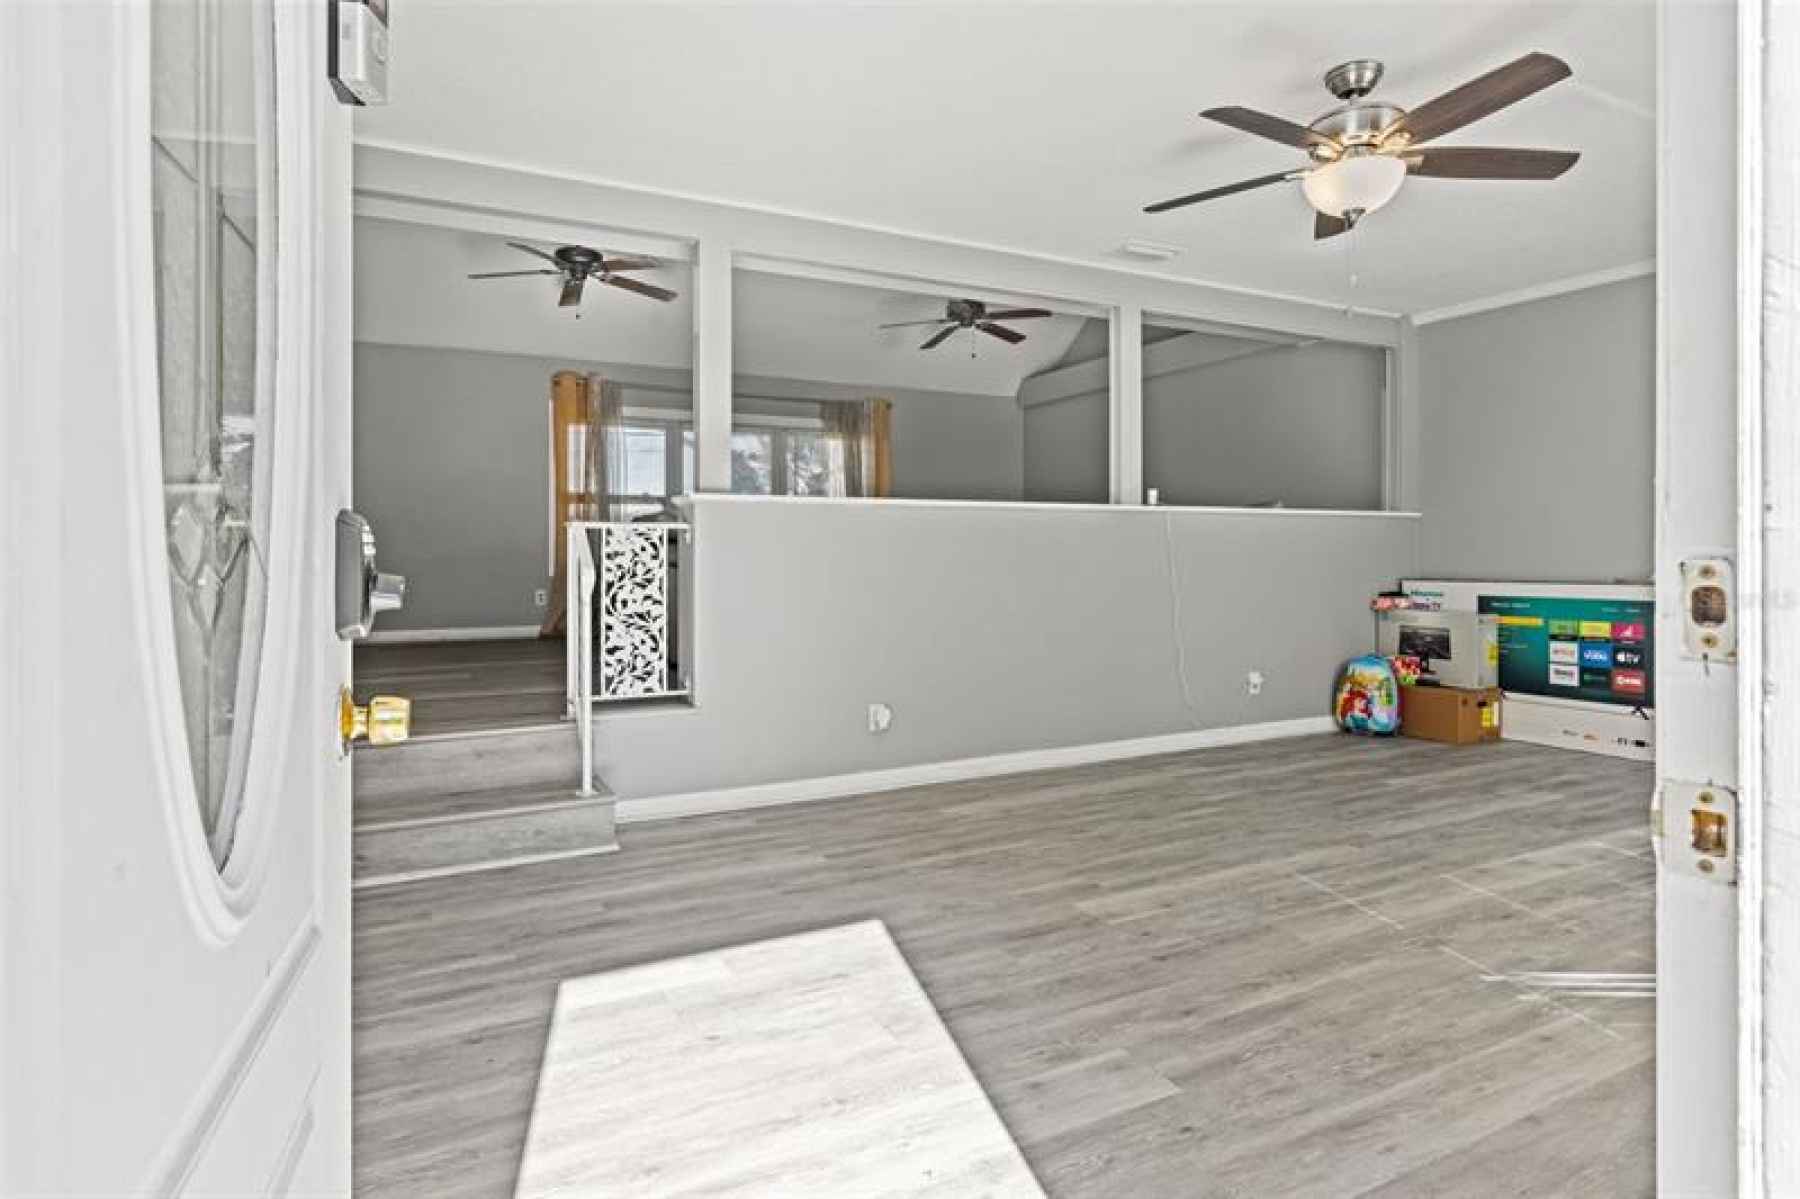 Enter the formal living room with ample space and lots of natural light!